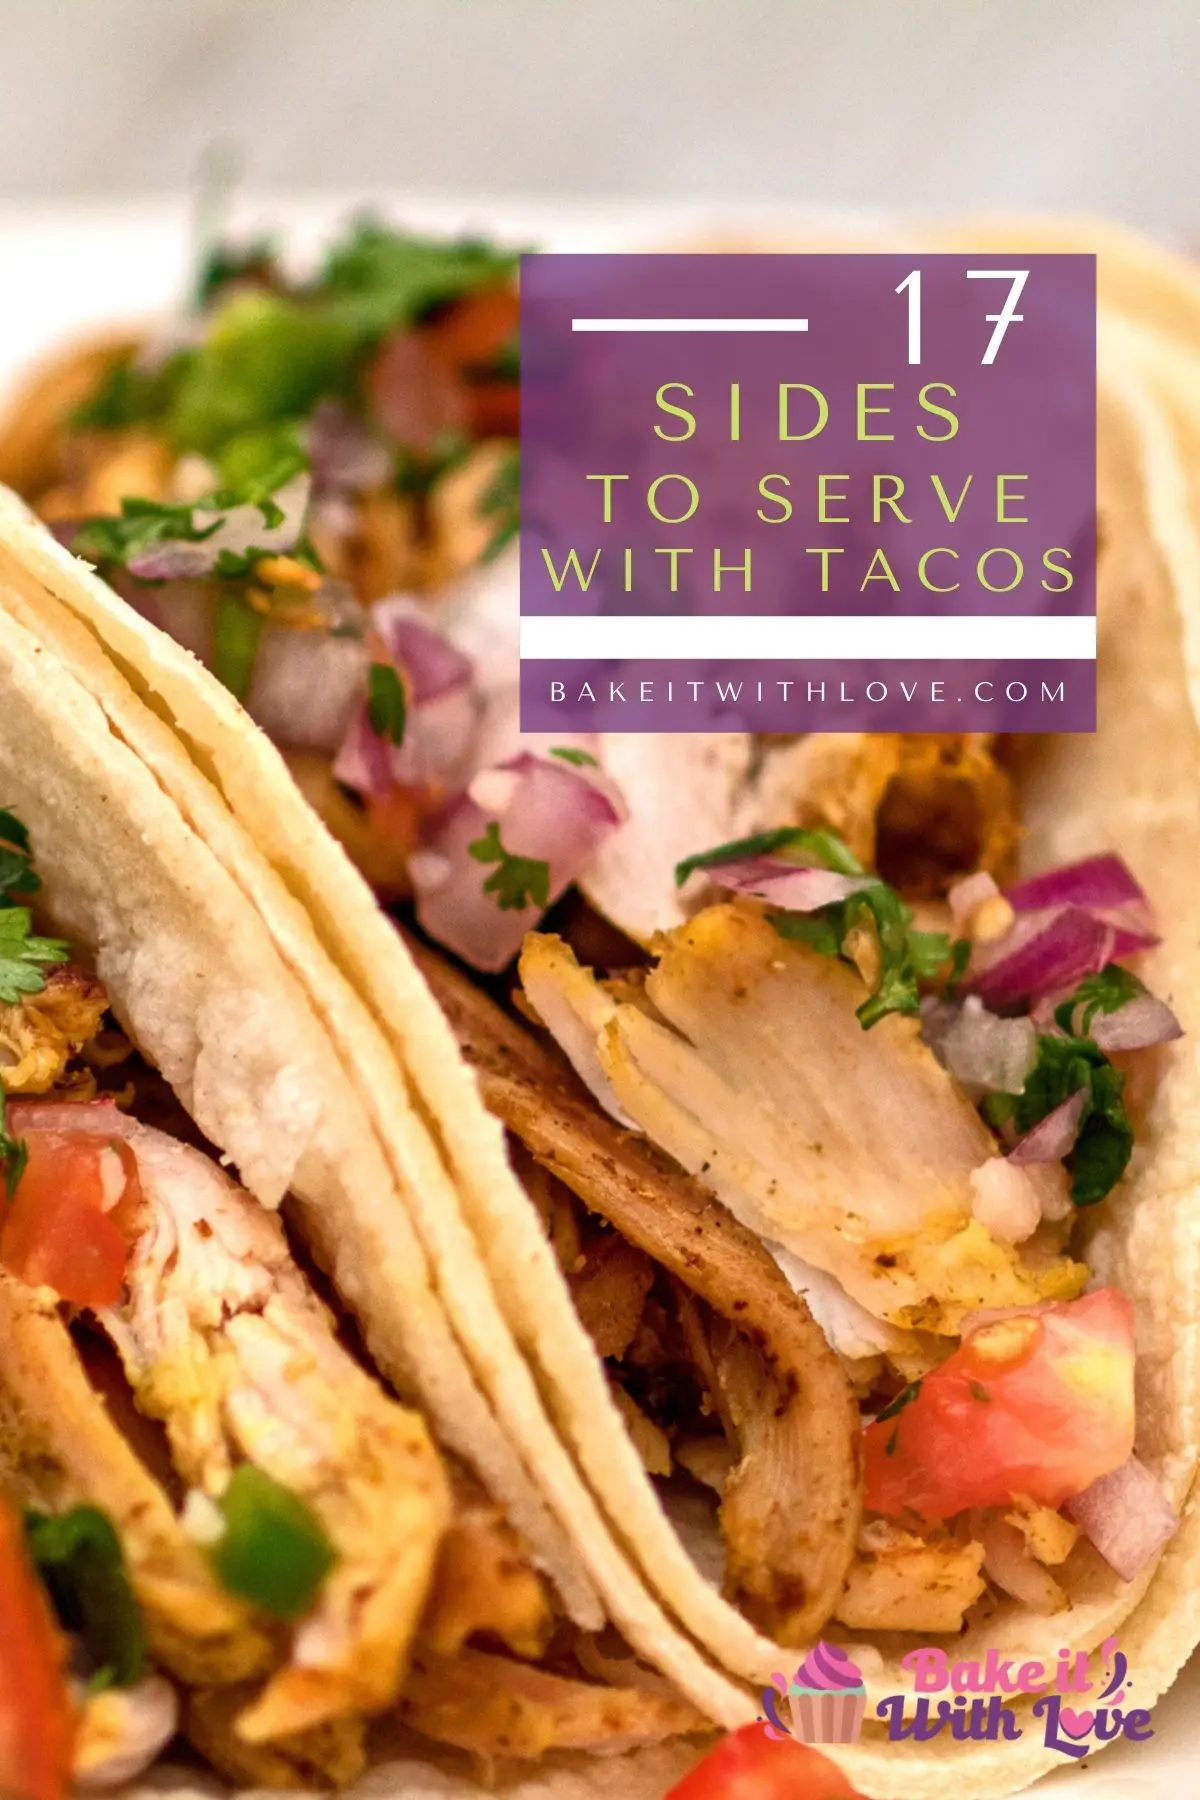 The most amazing collection of sides to serve with tacos!